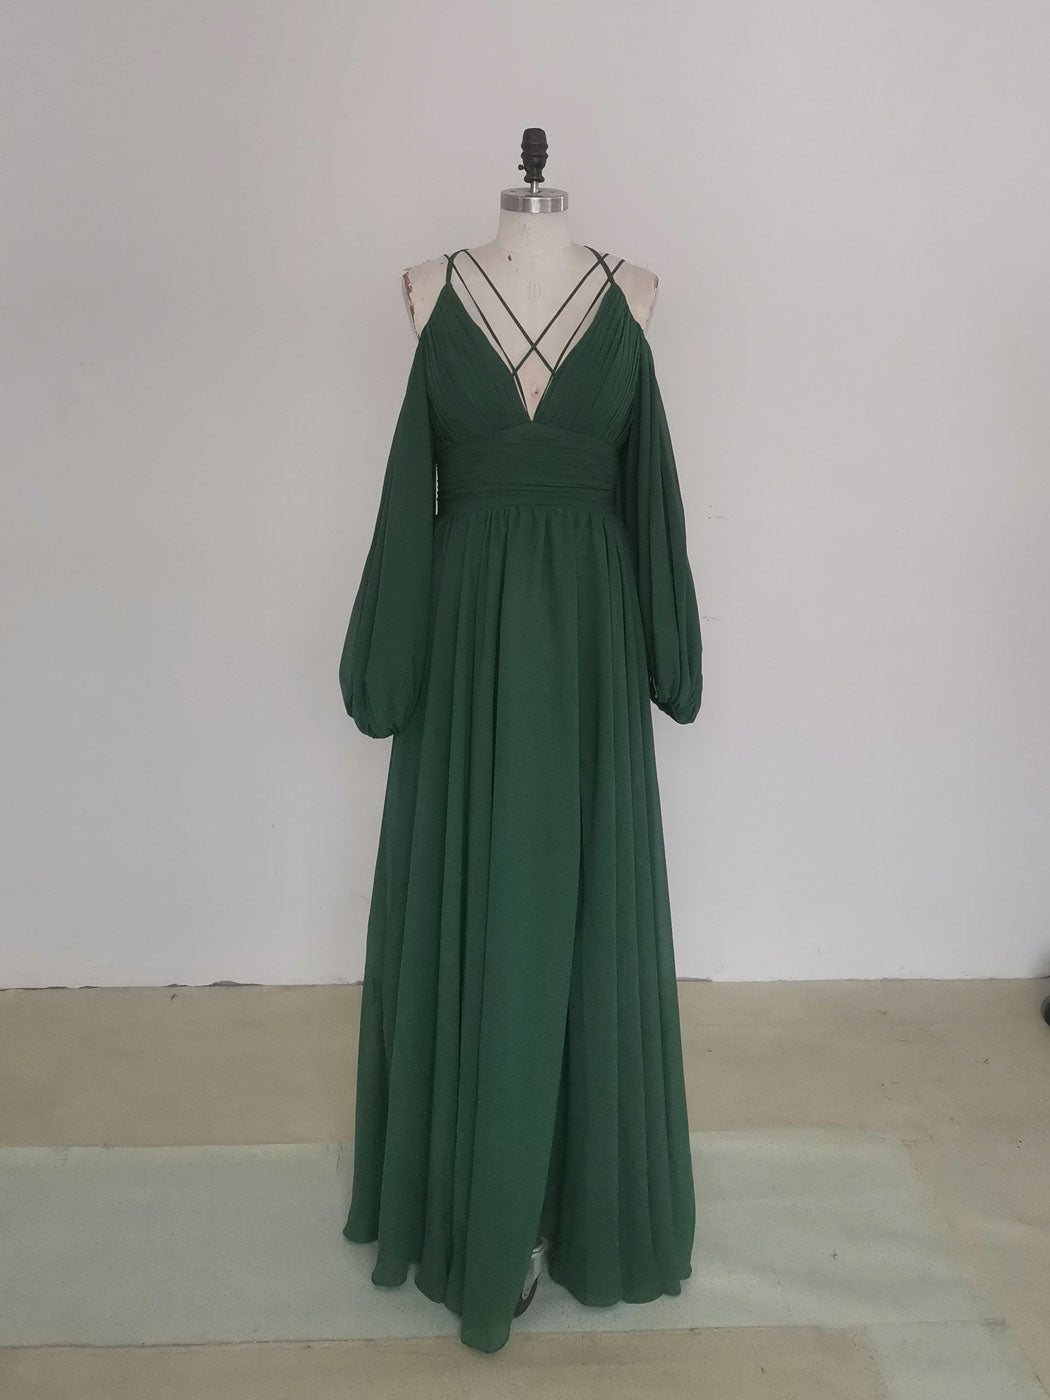 Simple A line Green Chiffon Long Prom Dress Outfits For Girls, Green Bridesmaid Dress